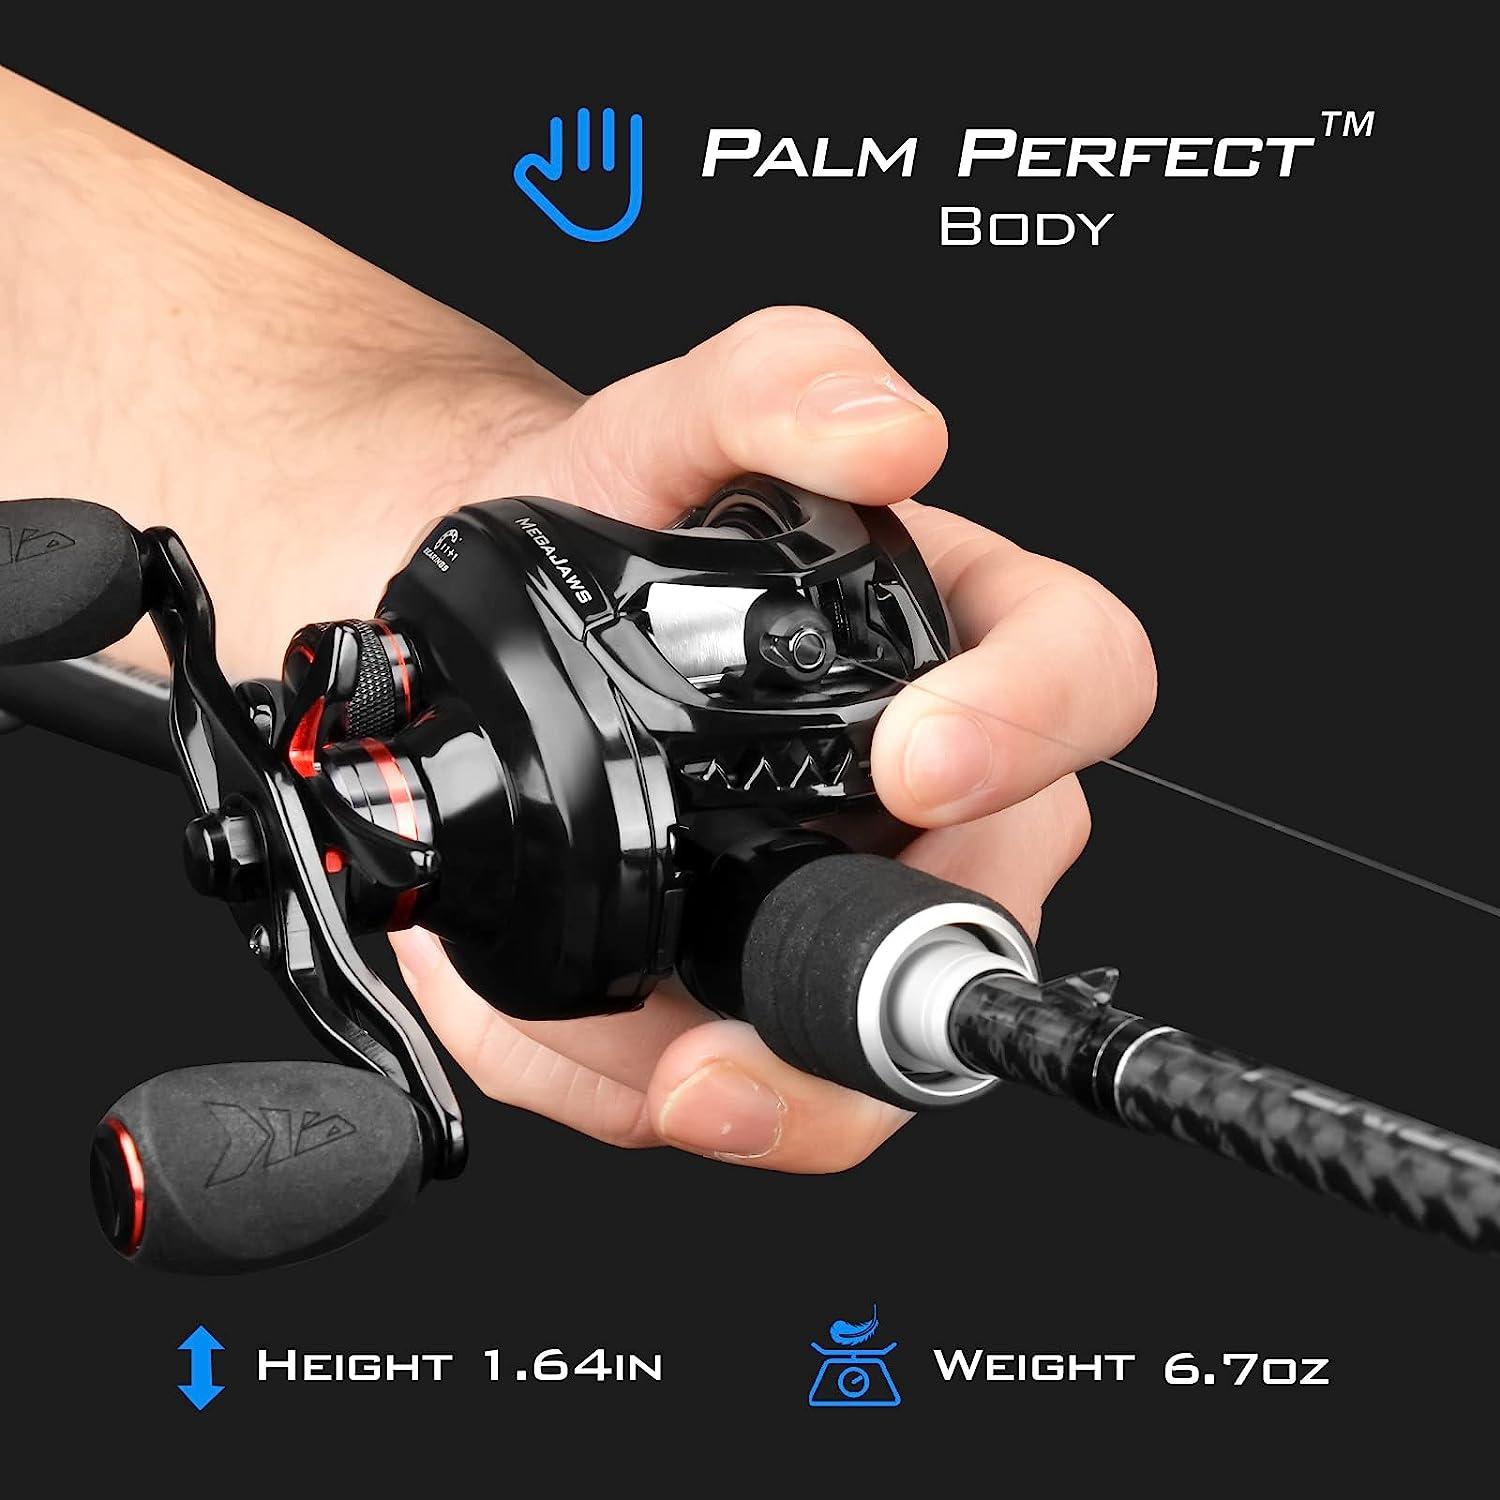 KastKing MegaJaws Baitcasting Fishing Reel, New AutoMag Dual Braking System  Baitcaster Fishing Reel, Only 6.7oz, 17.64 LBs Carbon Fiber Drag, 11+1  Shielded BB, High Speed 5.4:1 to 9.1:1 Gear Ratios A:Right Handed-Blacktip- 7.2:1